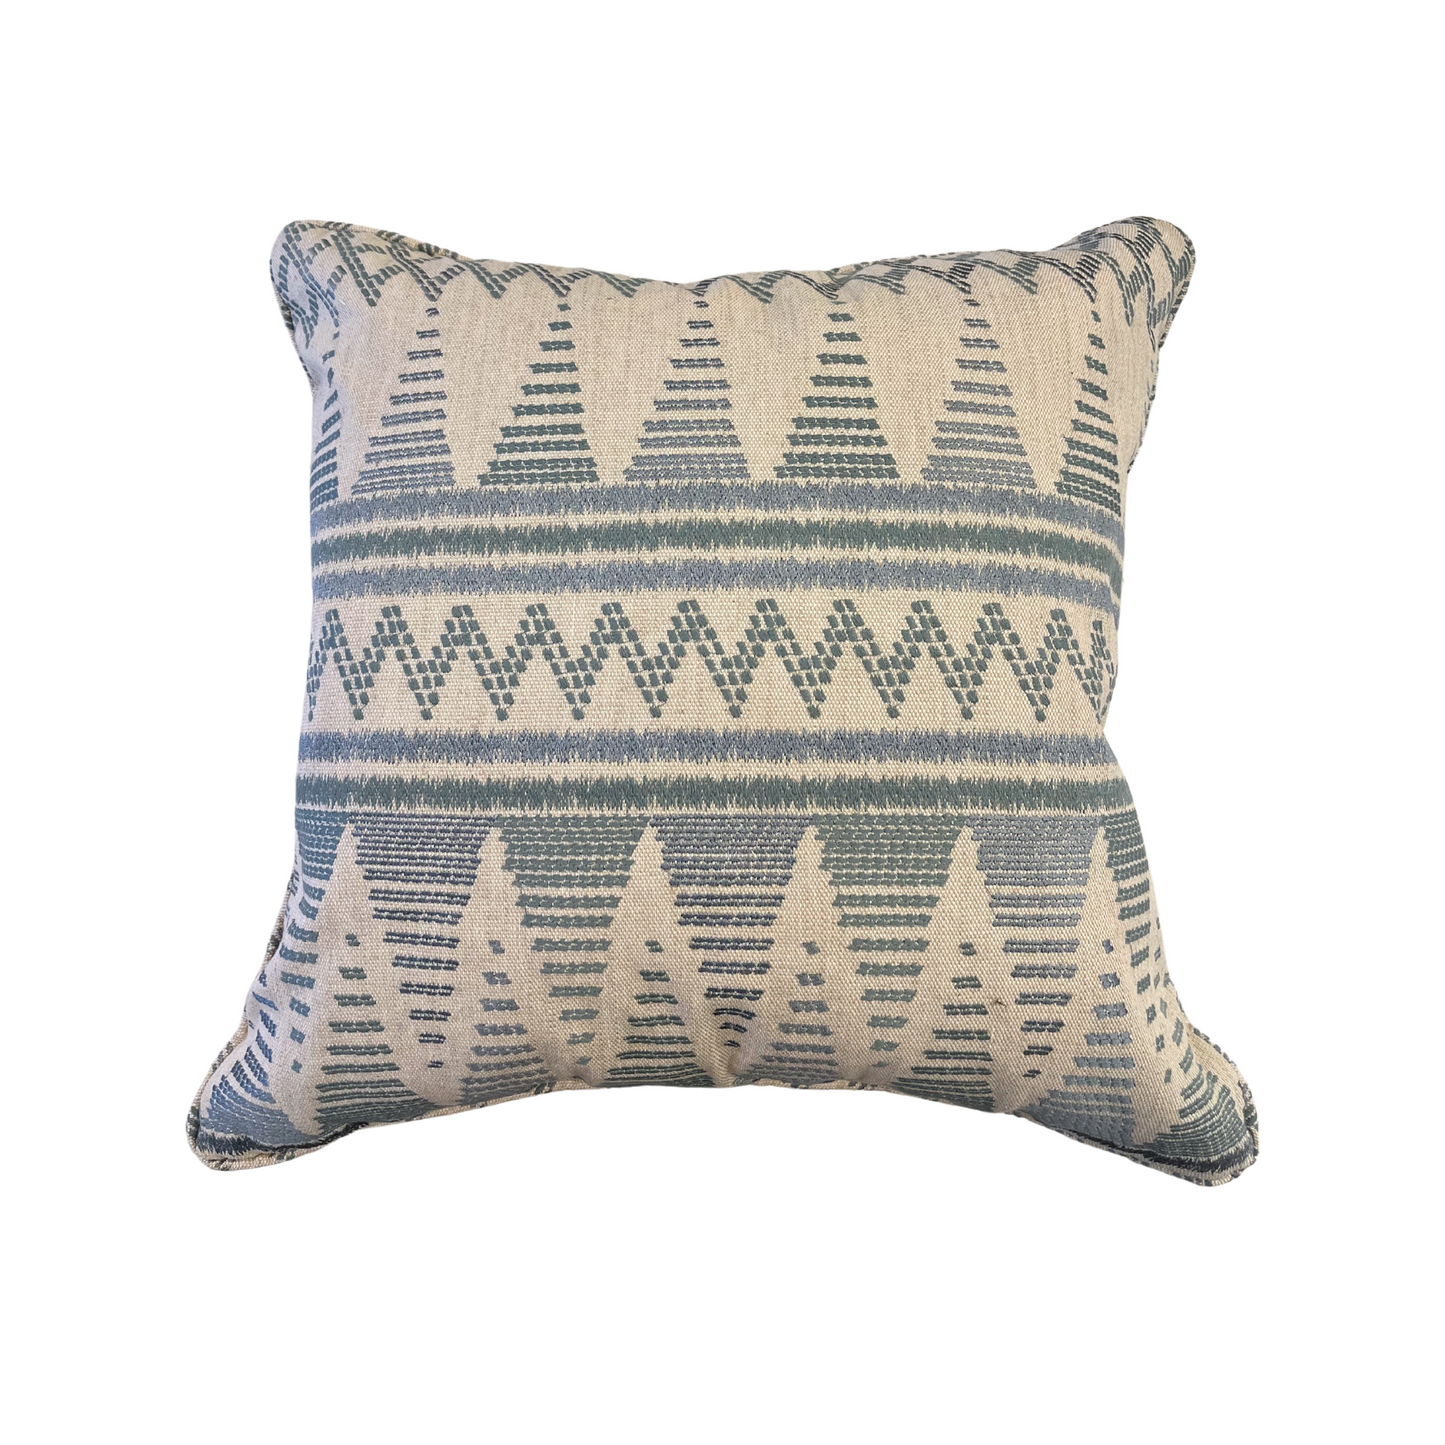 22" x 22" Pillow - Embroidered Zig Zag in Cadet Blue